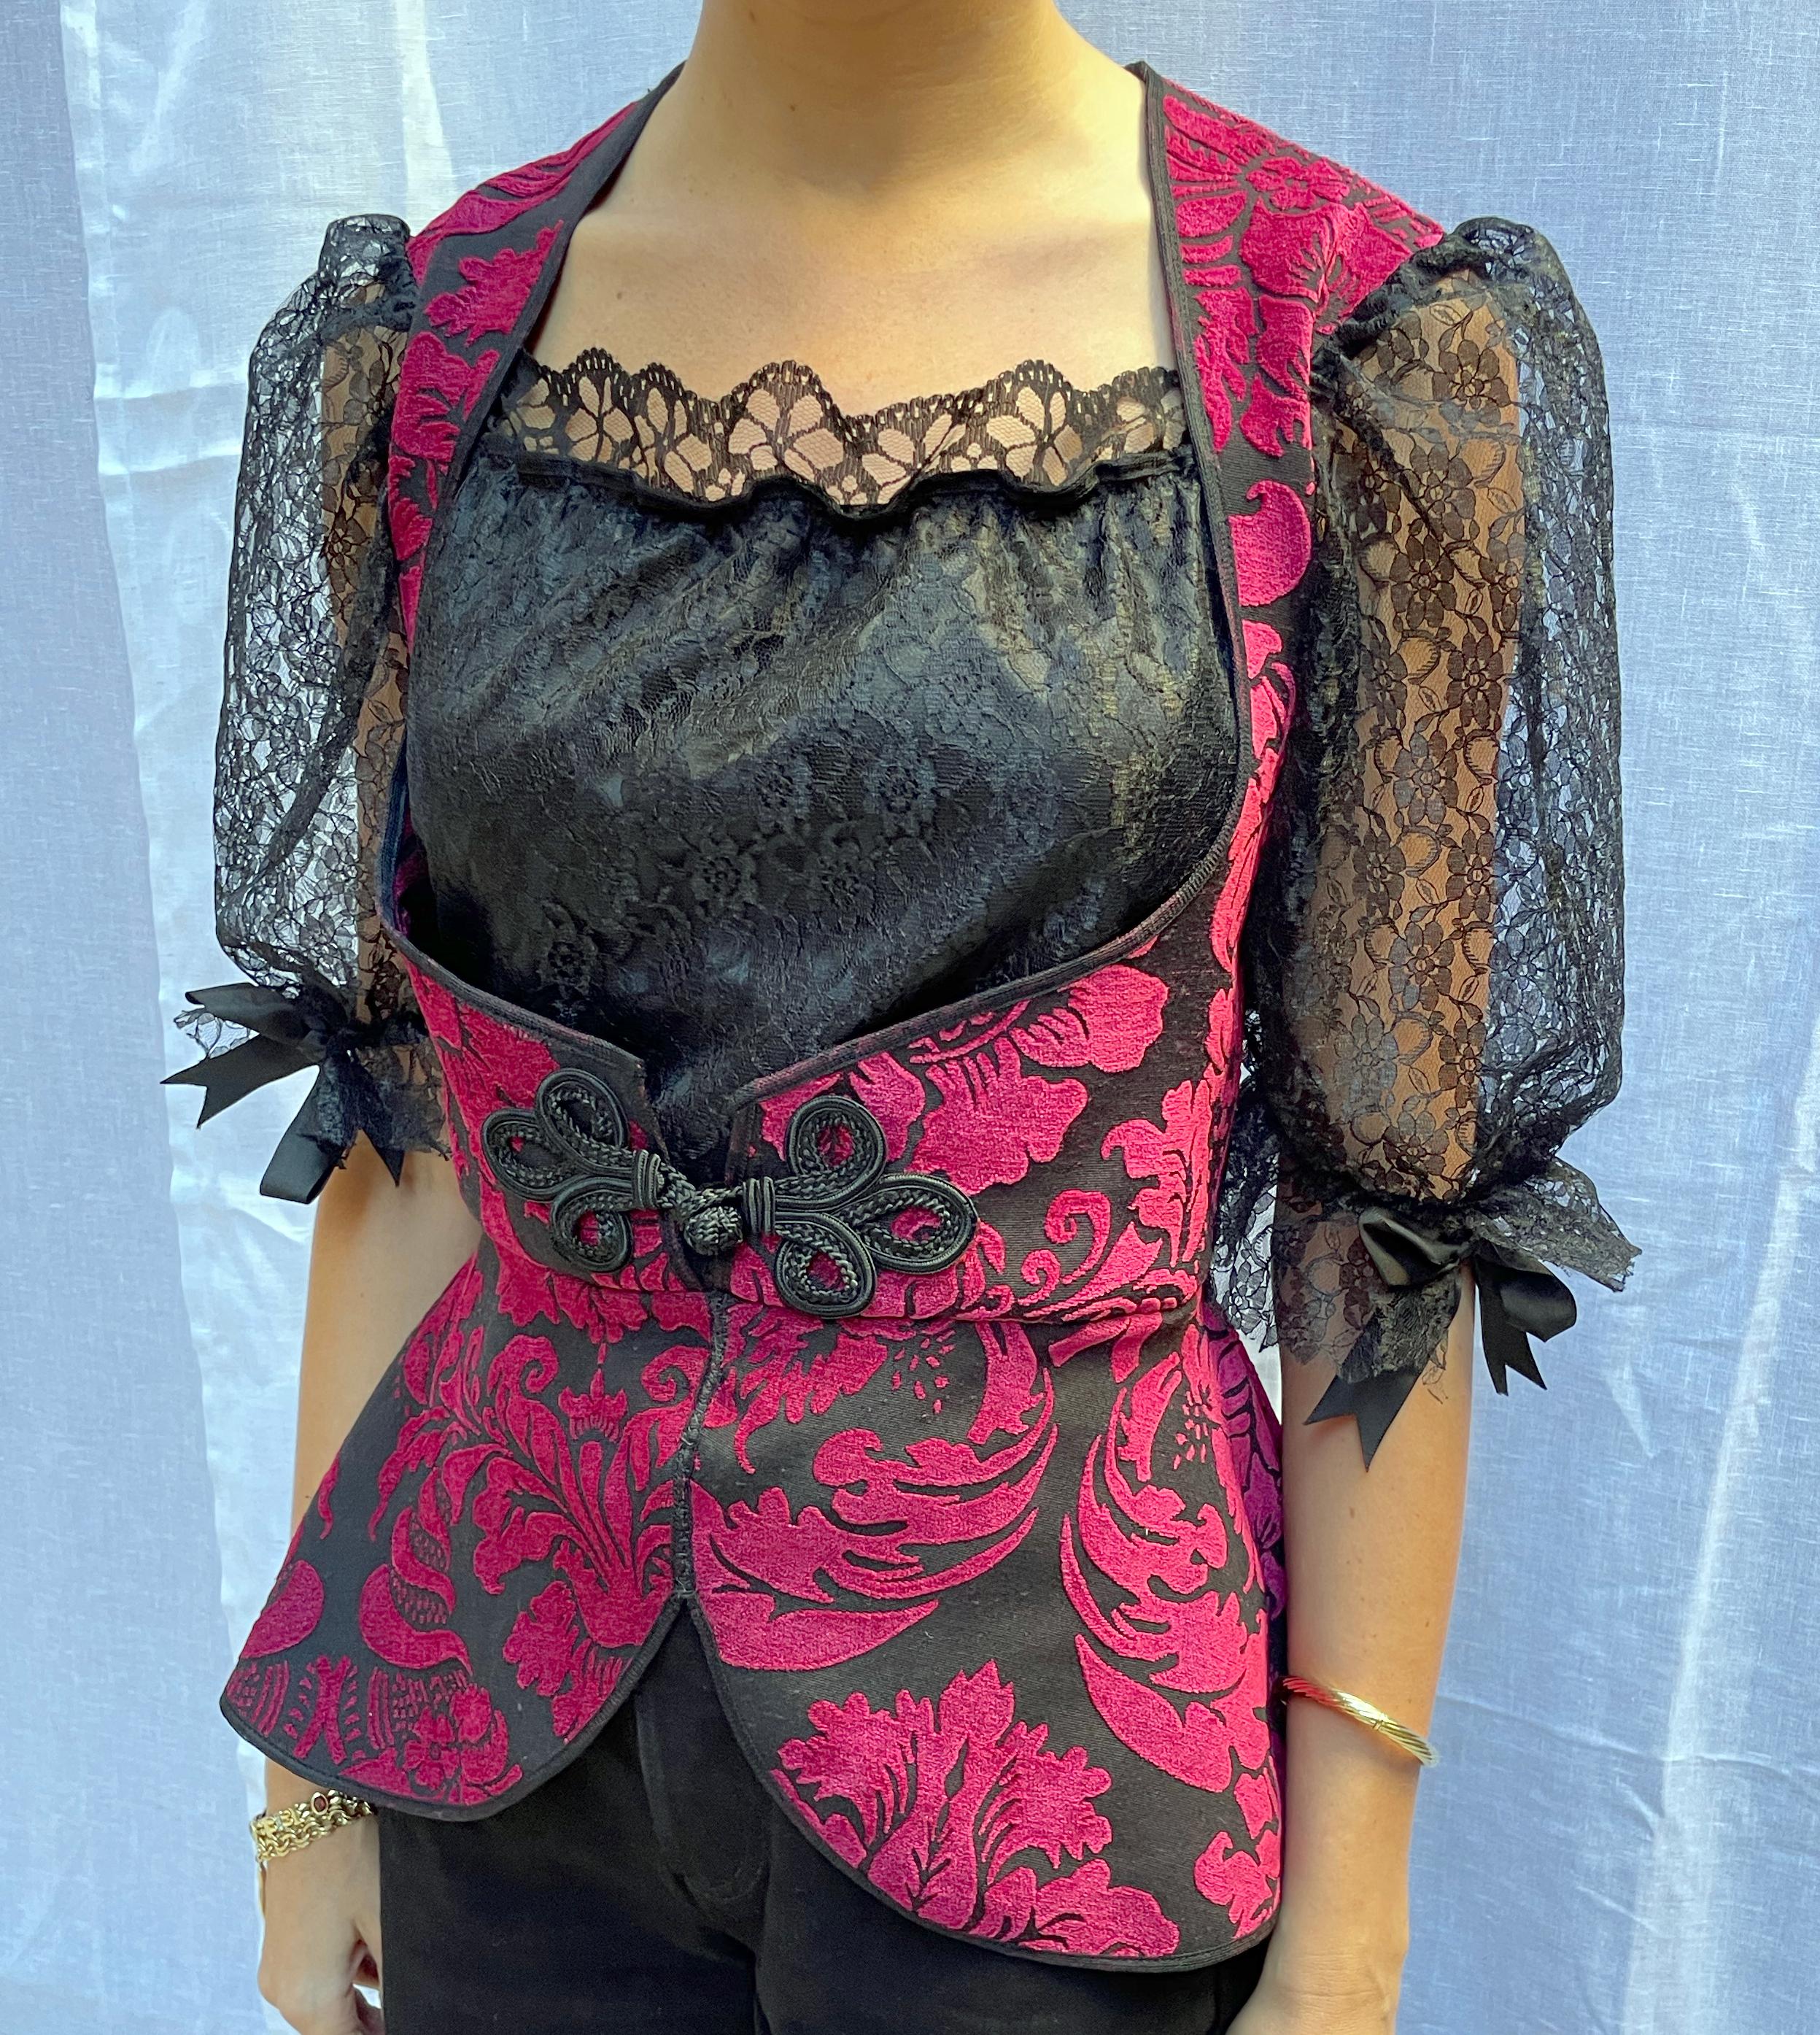 This Vintage Brocade and Lace Dirndl Top is giving me big time Bridgerton vibes! This handmade romantic brocade top emulates the traditional German dirndl, a type of dress that originates in the German Alps. The sleeves are sheer black lace (with